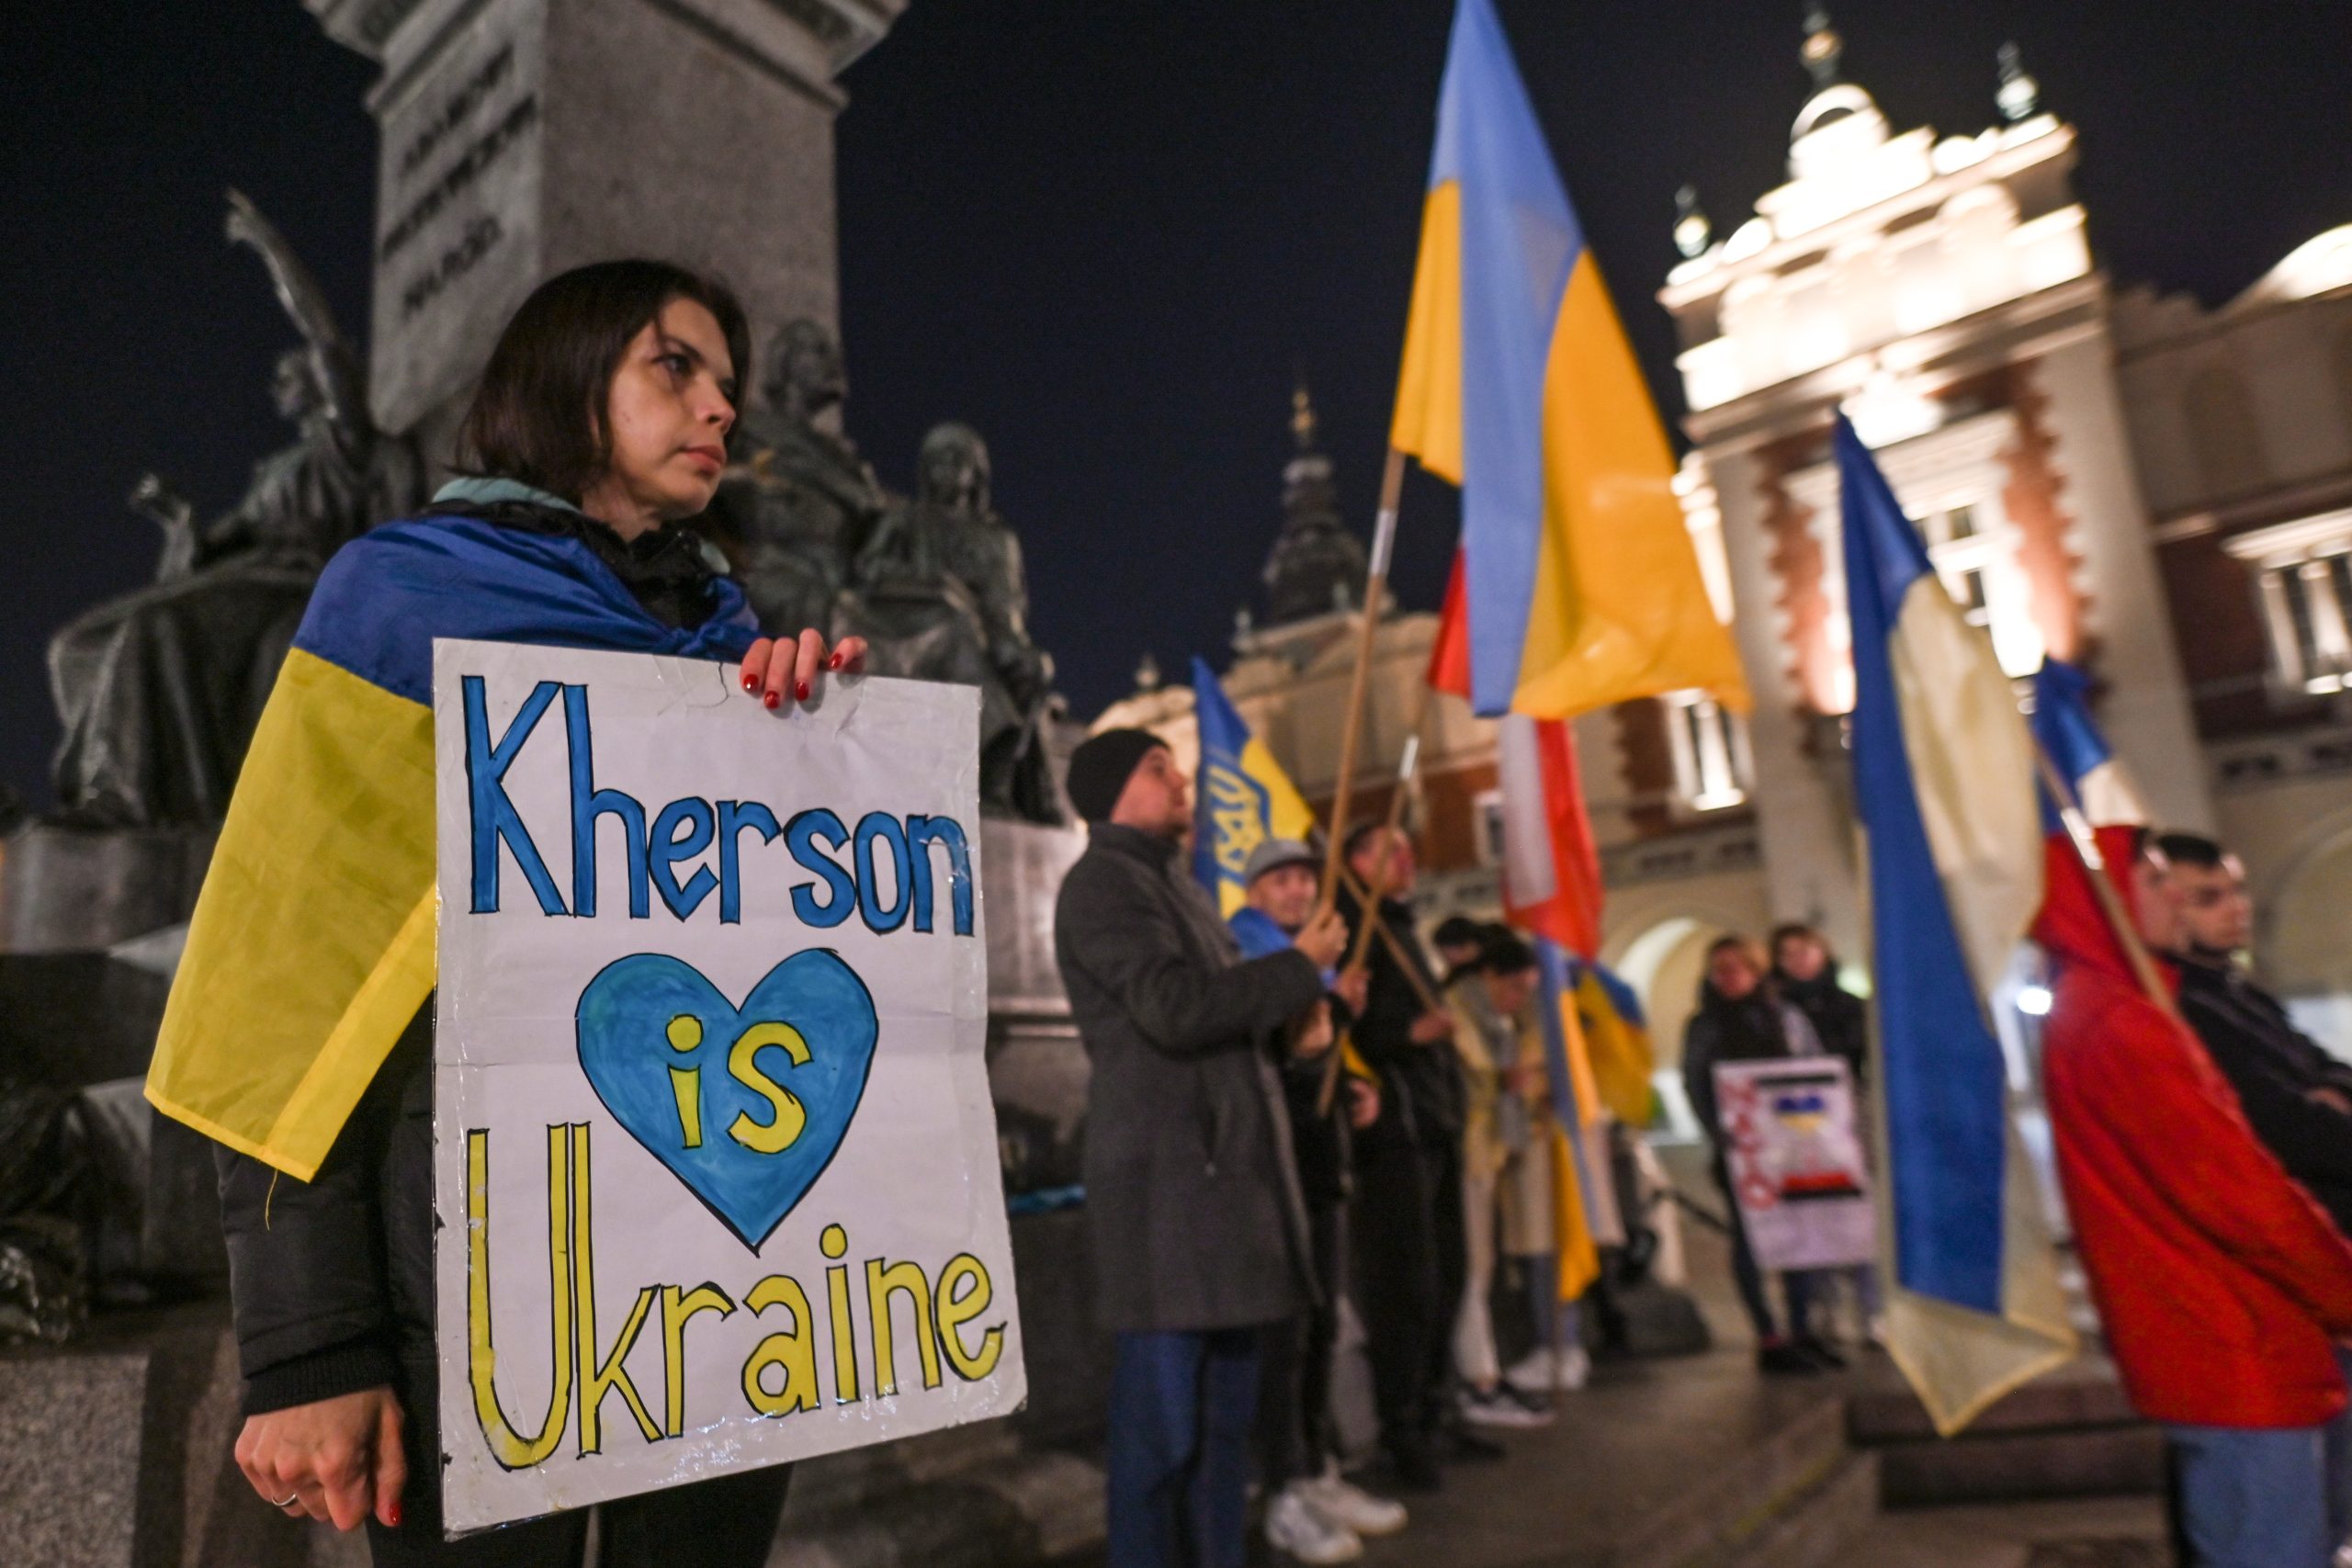 Ukrainians people living in Krakow and their supporters are seen during the Solidarity With Ukraine protest in Krakow's Main Square, on the 232nd day of the Russian invasion of Ukraine.